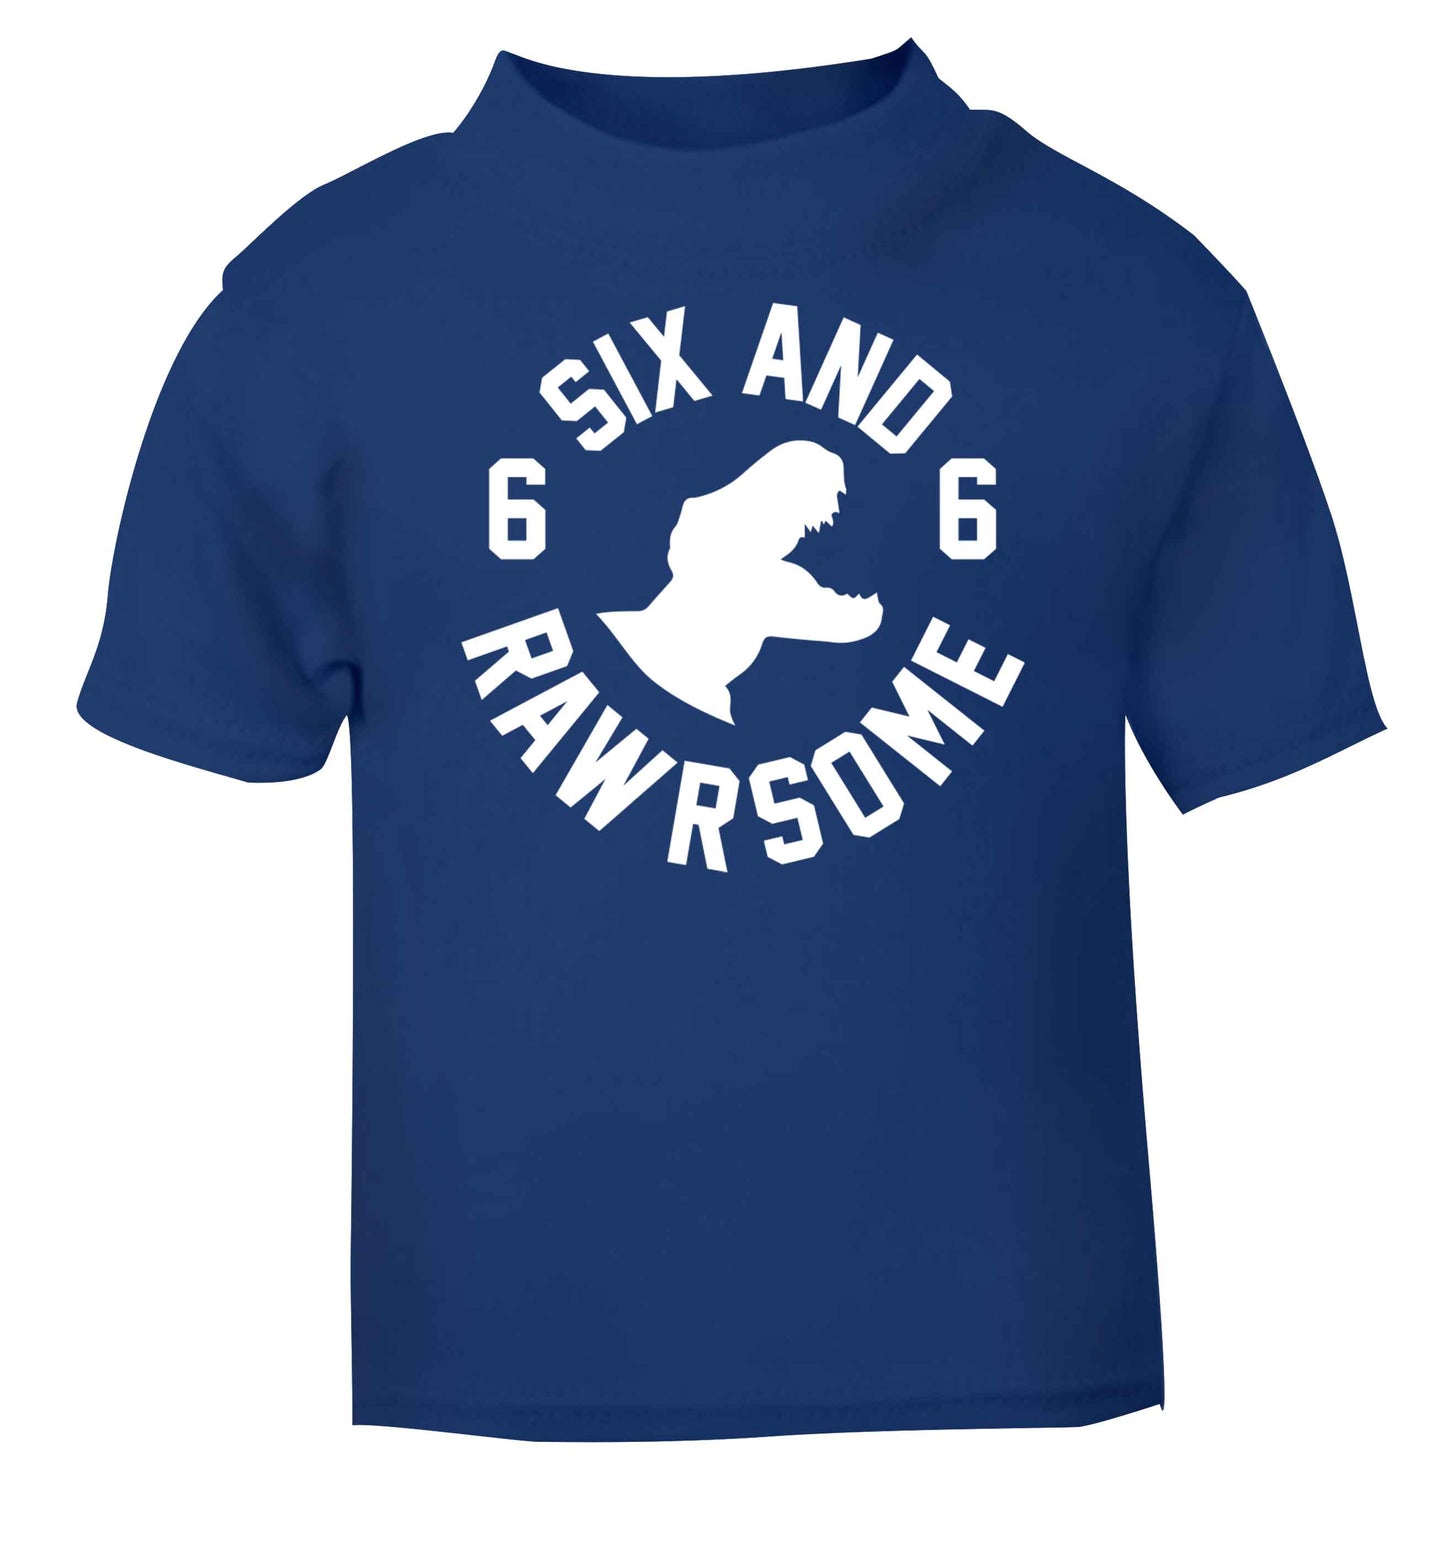 Six and rawrsome blue baby toddler Tshirt 2 Years